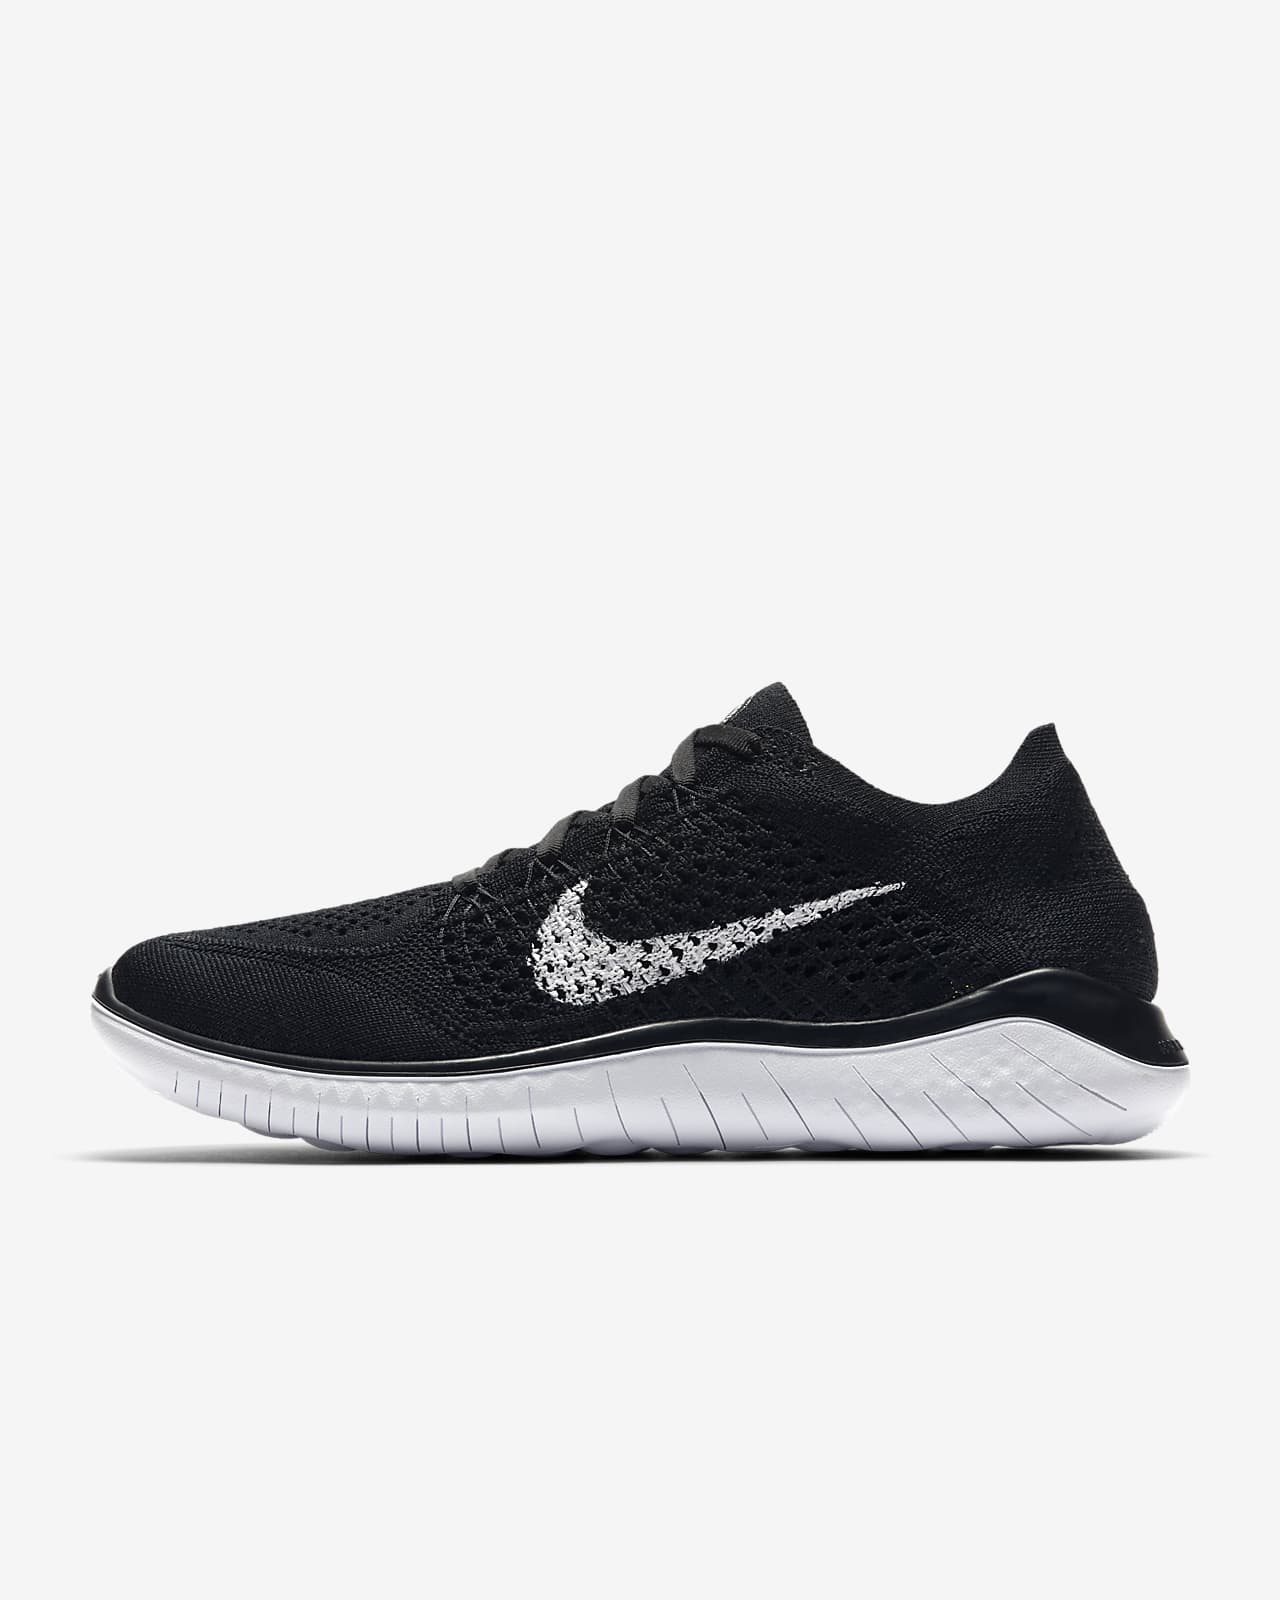 Adjustment Suffix Specially Nike Free Run 2018 Women's Running Shoes. Nike.com